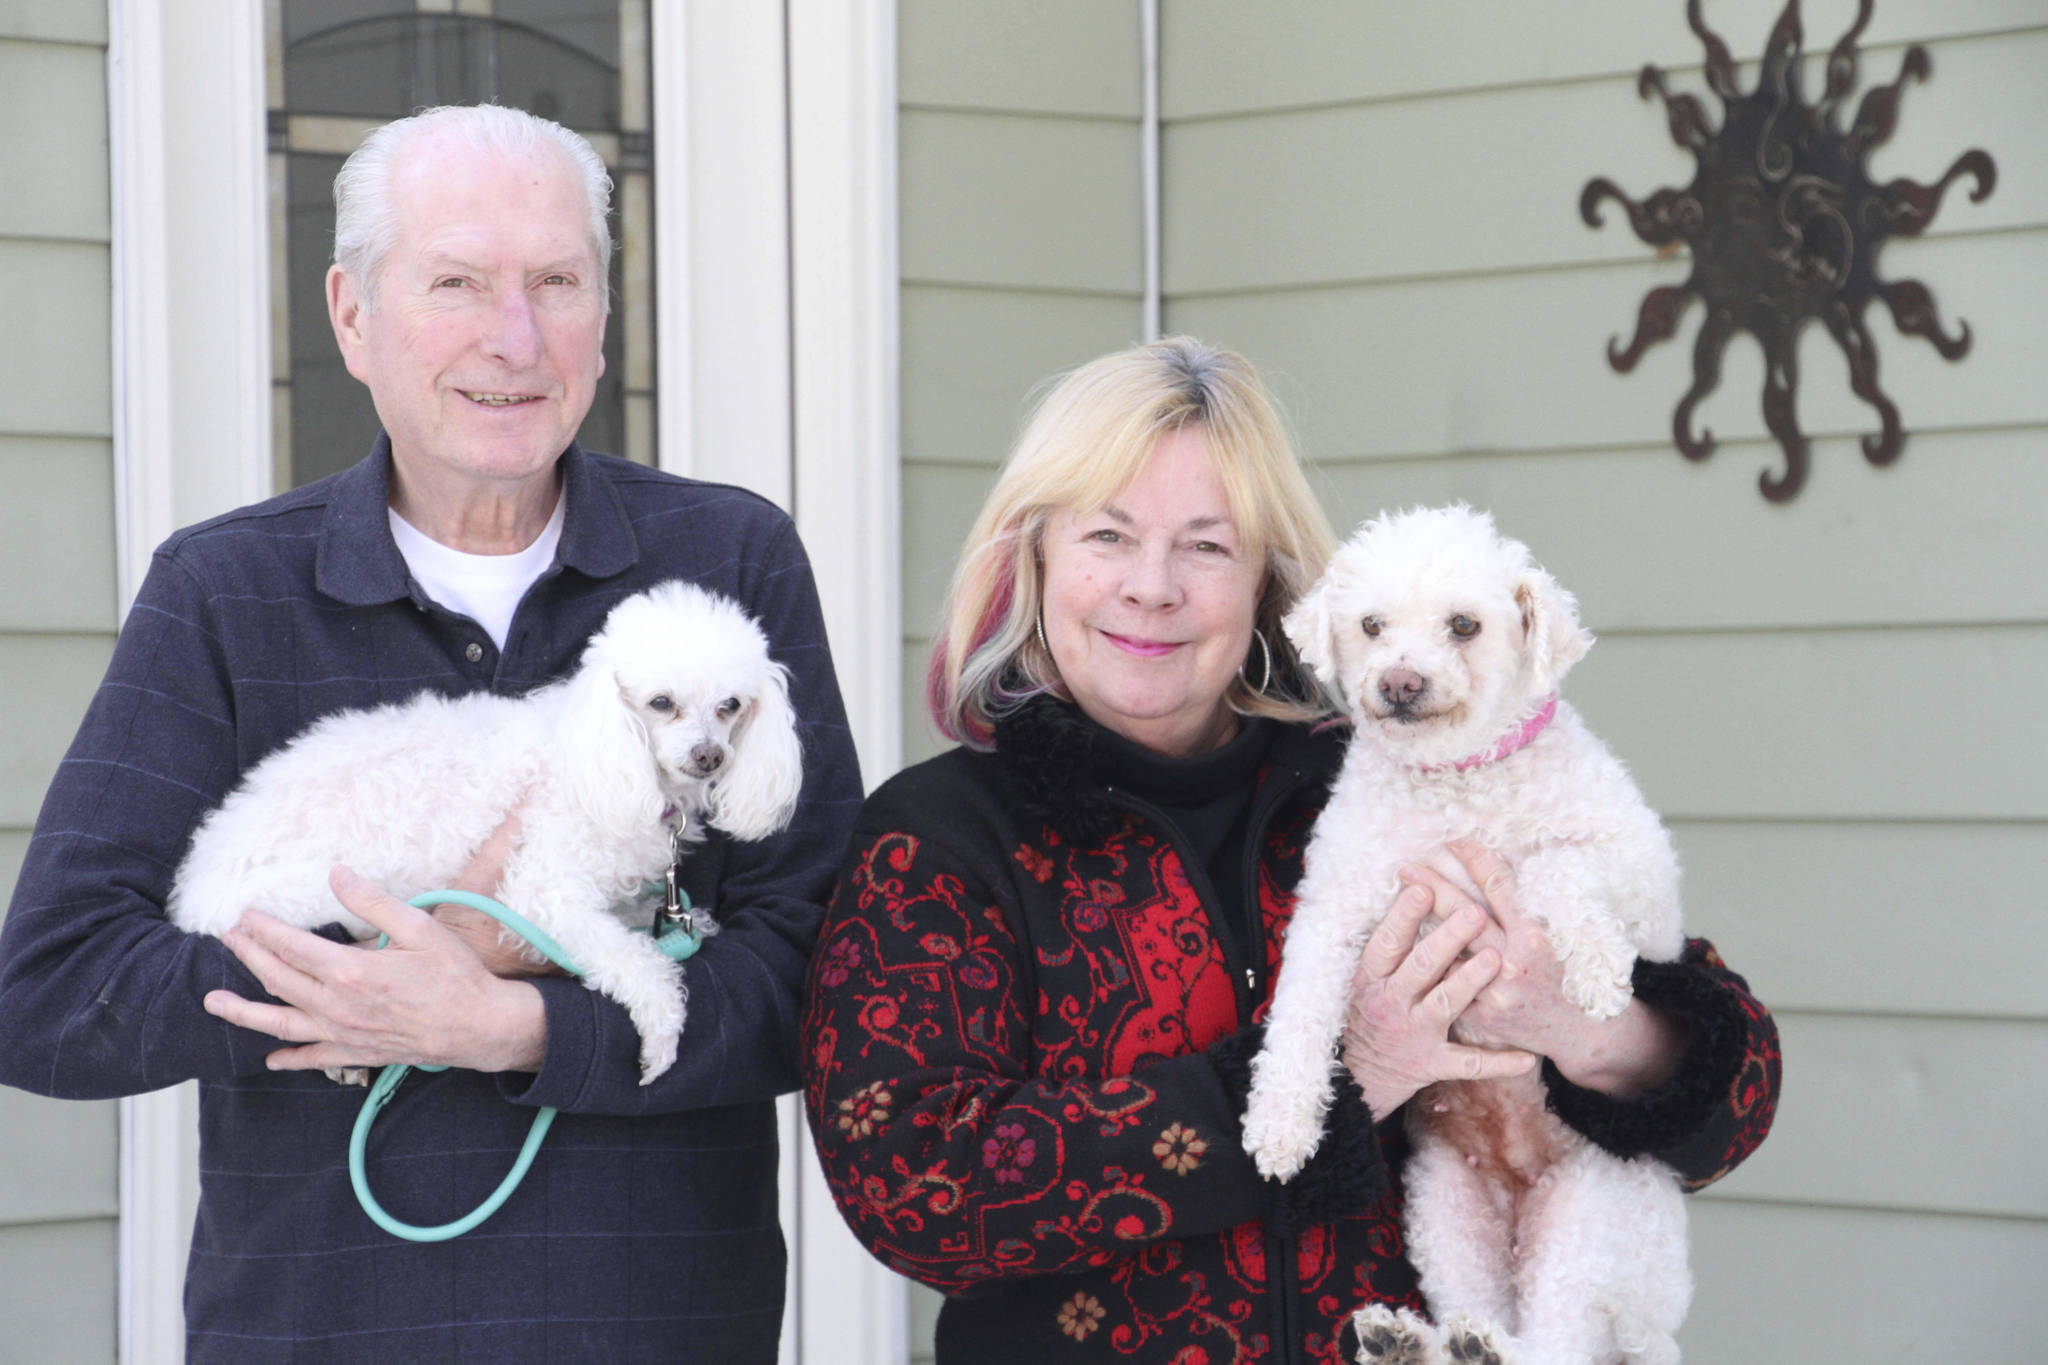 In this March 26, 2020, photo, Ron Offret poses with their dog Suzie while his wife Ina Pizzolato Offret is shown with Kelsey, a dog they are fostering at their home in Anchorage, Alaska. Worried that the coronavirus outbreak would cause animal adoptions to plunge, shelters across the country put out the call for people to temporarily foster pets. (AP Photo/Mark Thiessen)